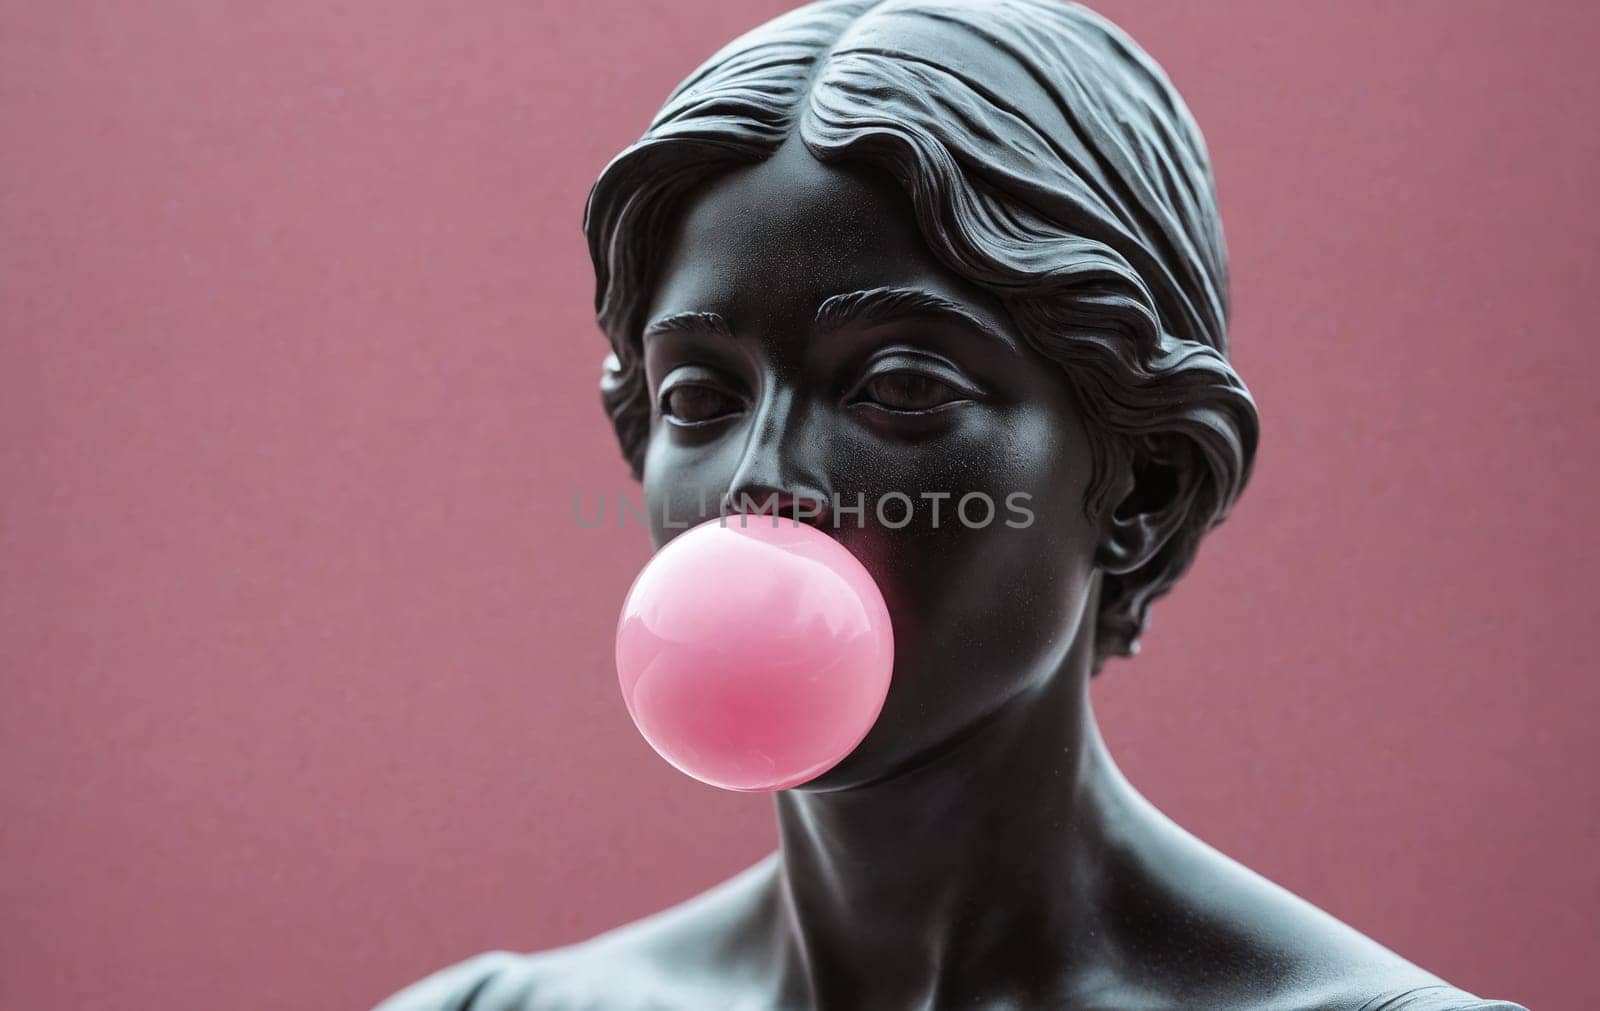 The statue depicts a woman with a bubble gum in her mouth, showcasing detailed features like nose, lips, chin, jaw, and a playful facial expression